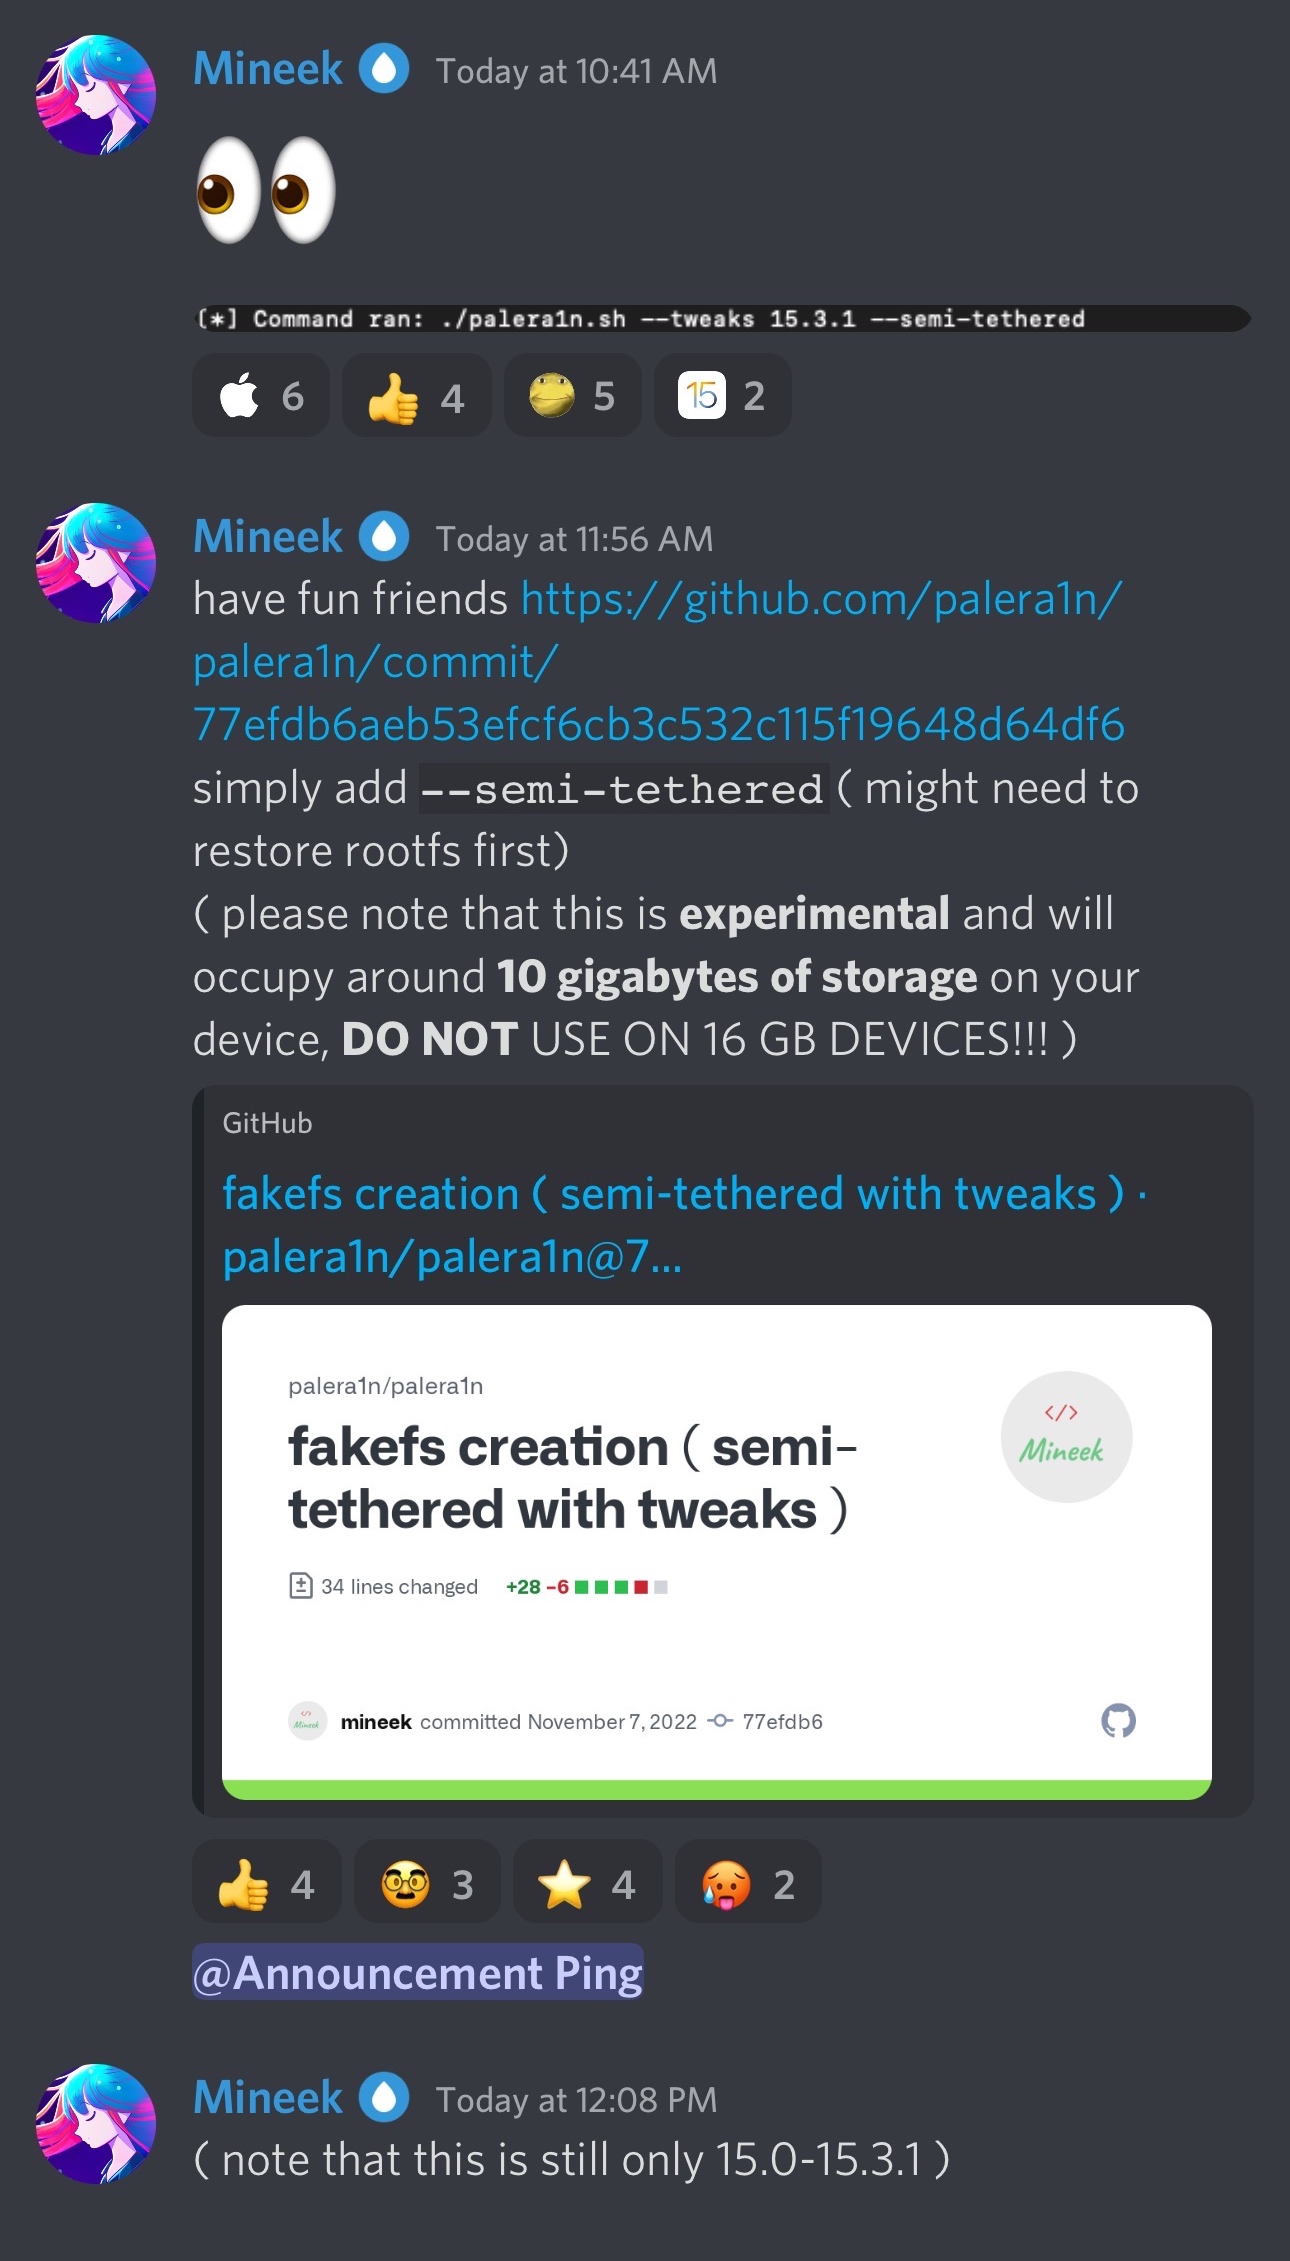 Mineek discusses semi-untethered support for palera1n via Discord.